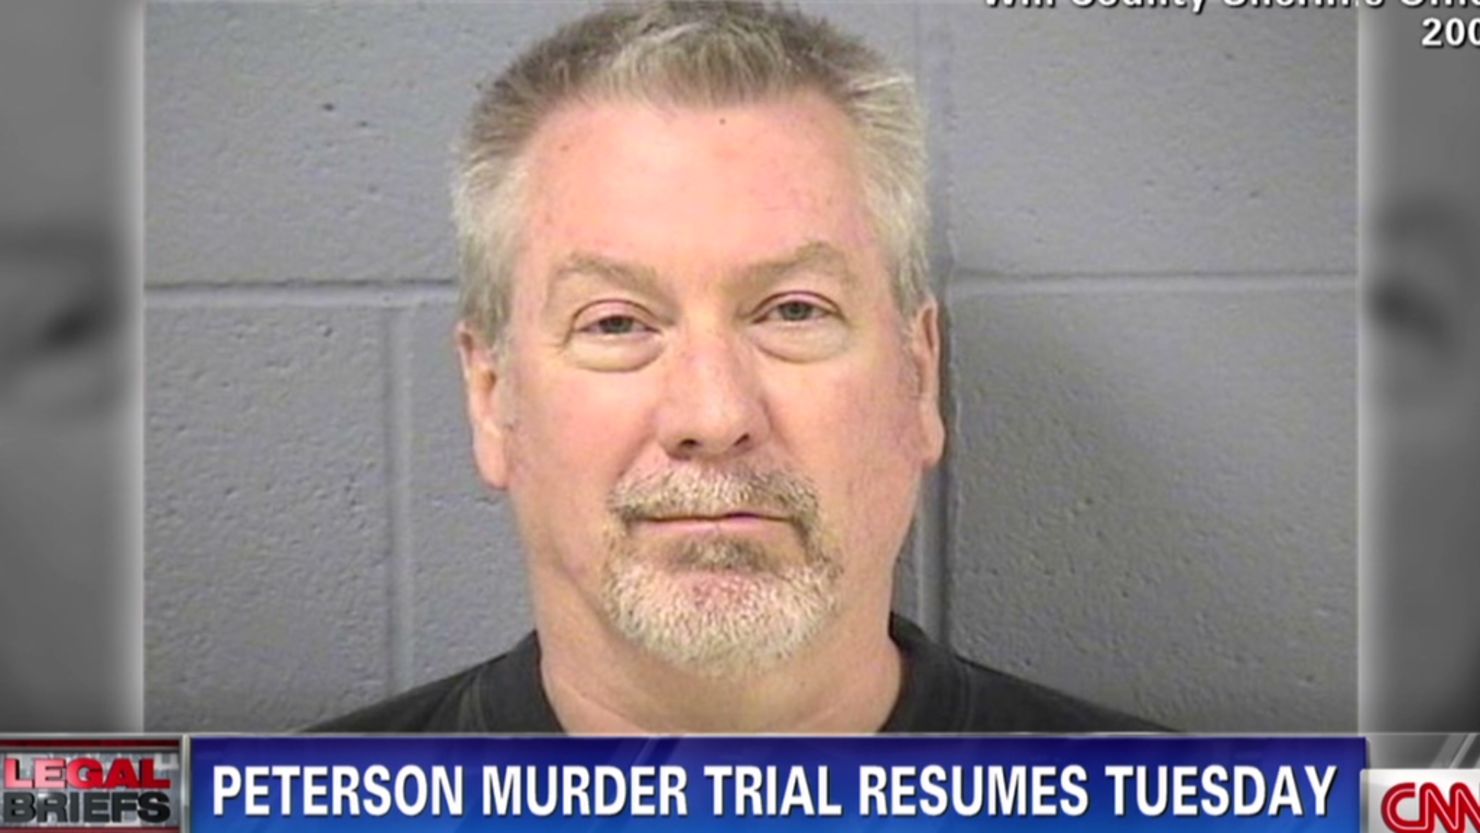 Drew Peterson is charged in the death of his third wife, and he's considered a suspect in the disappearance of his fourth wife.